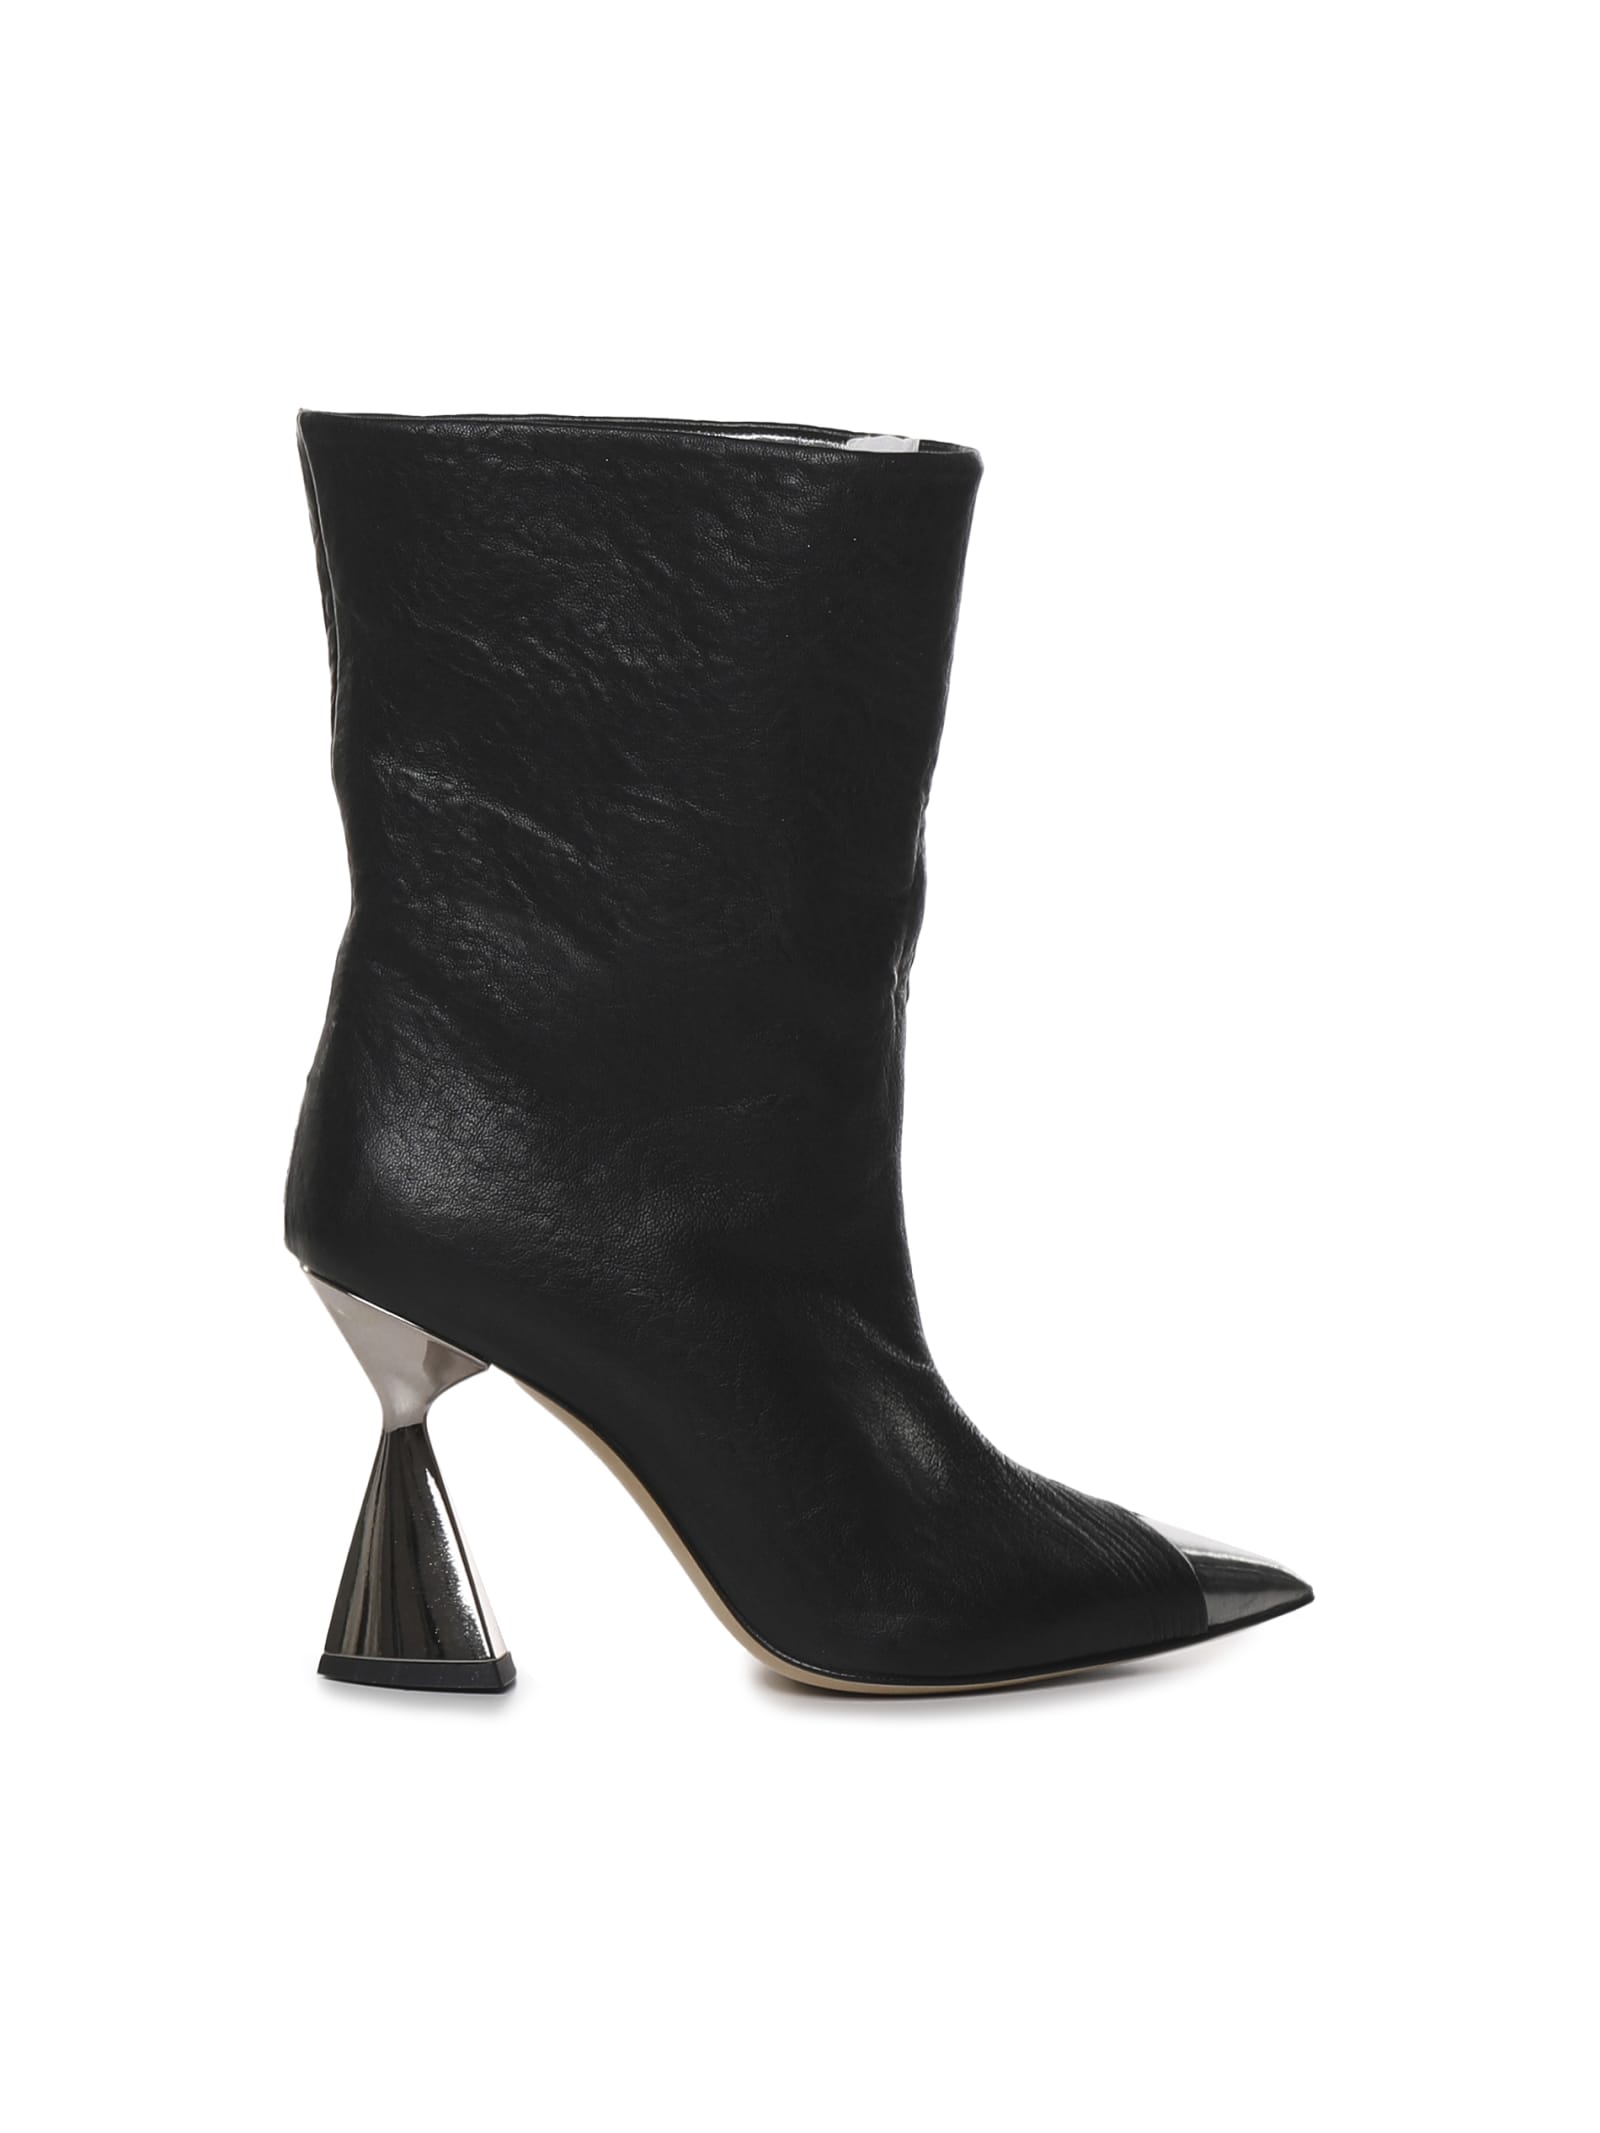 Alchimia Ankle Boots With Contrasting Toe In Black